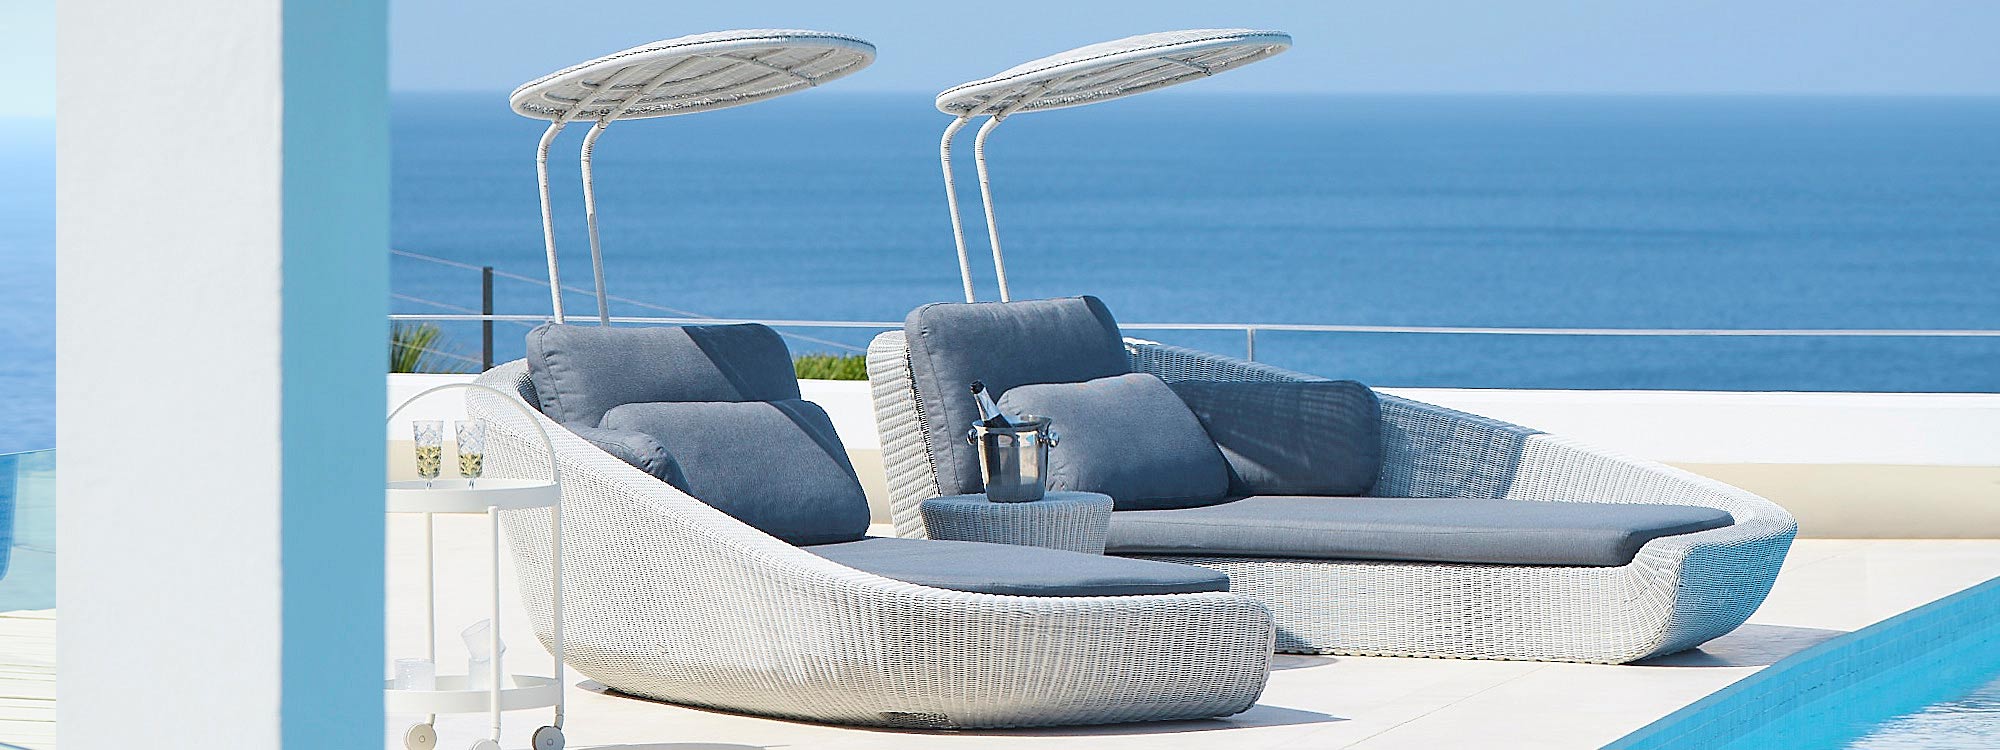 Savannah woven garden daybed is a luxury outdoor daybed in all-weather furniture materials by Cane-line modern rattan garden furniture Co.